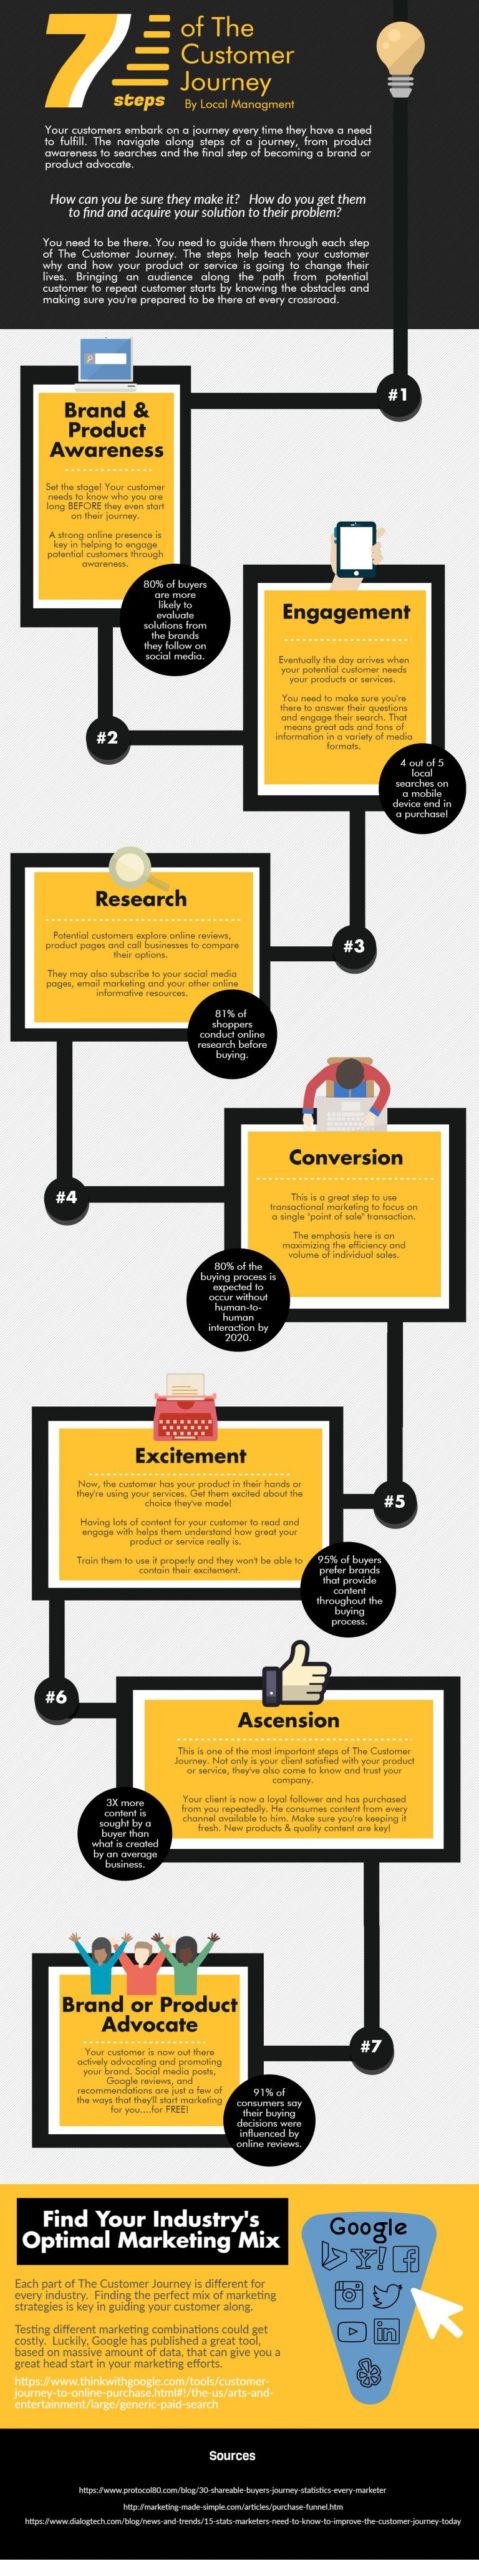 7 Steps of the Consumer Journey